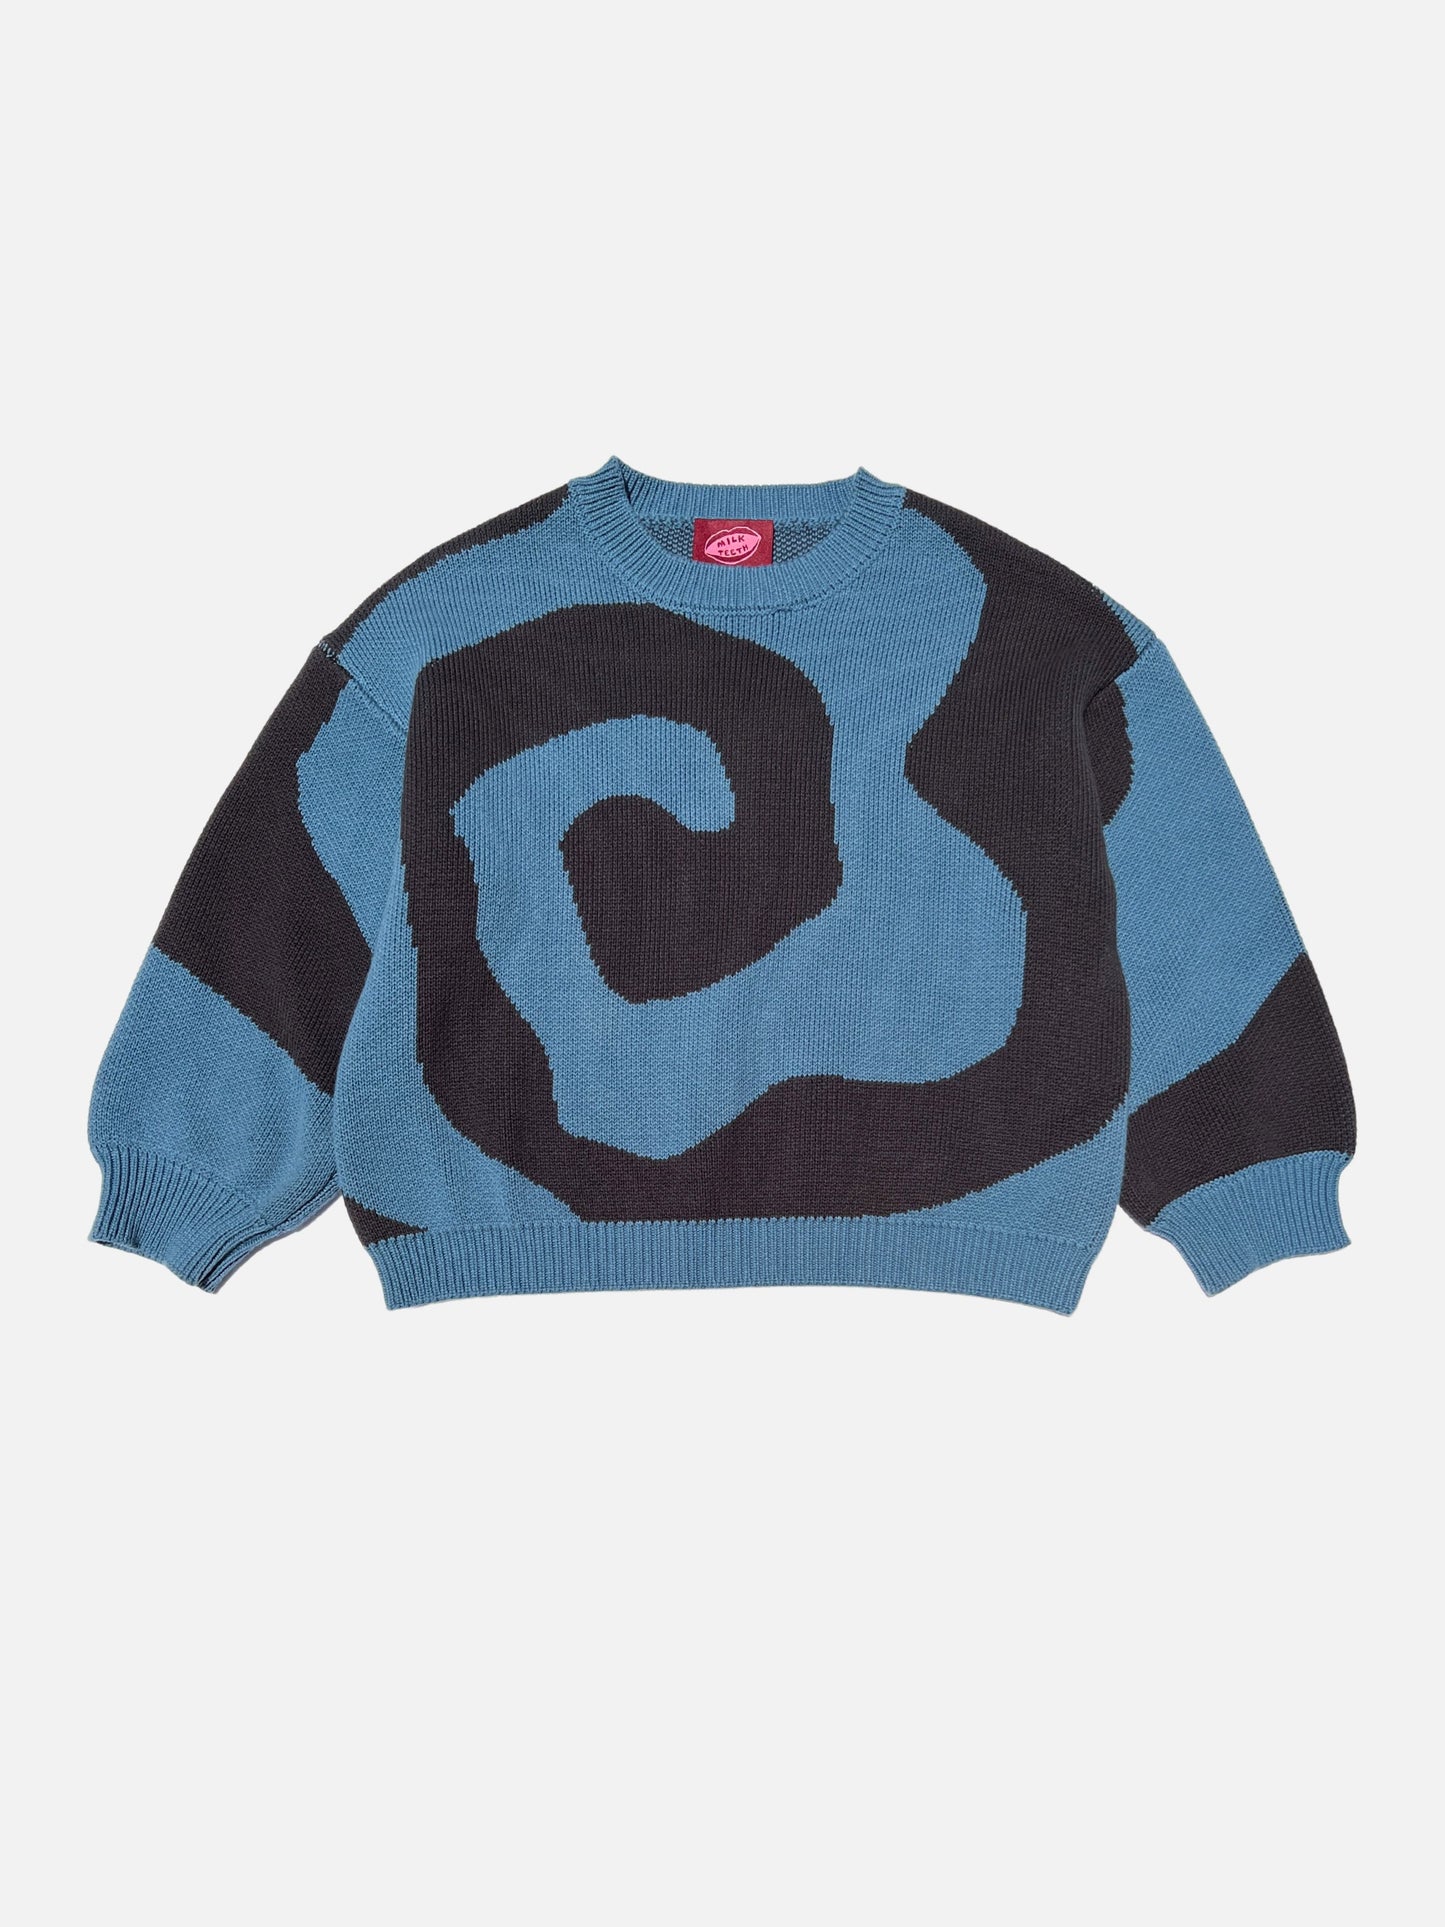 Slate | Front view of kids crewneck sweater in medium blue, with a large single charcoal grey swirl design that covers the entire sweater.